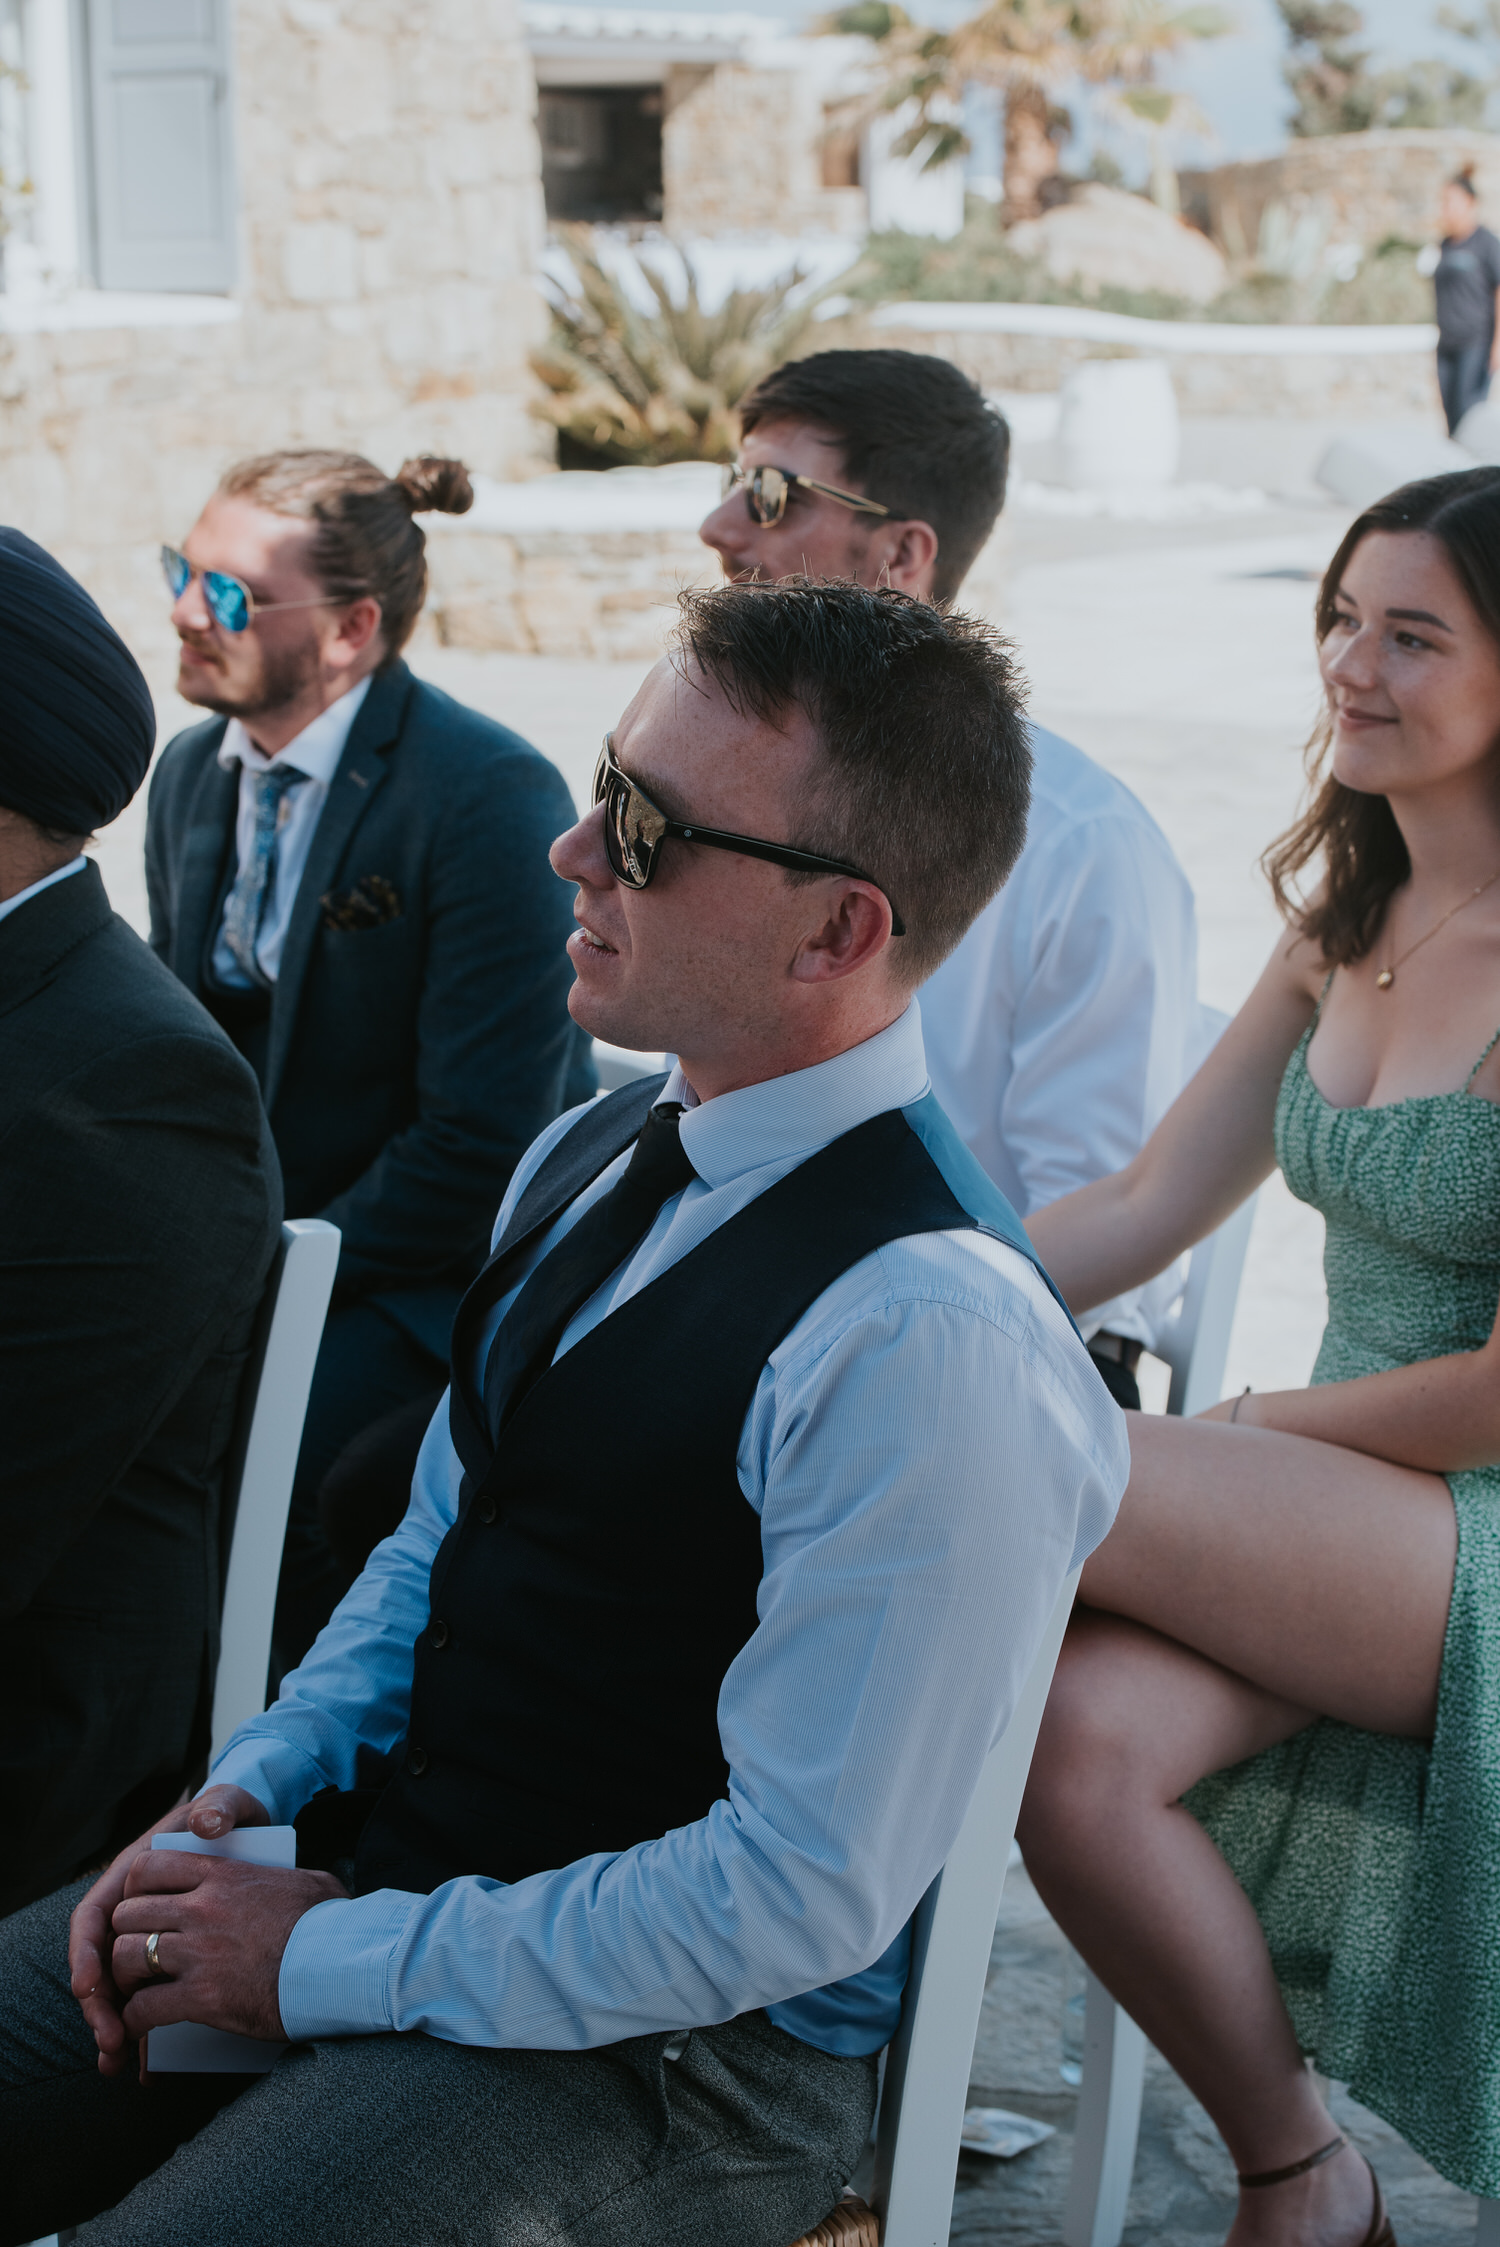 Mykonos wedding photographer: close up of guests sat in the shade enjoying the ceremony.